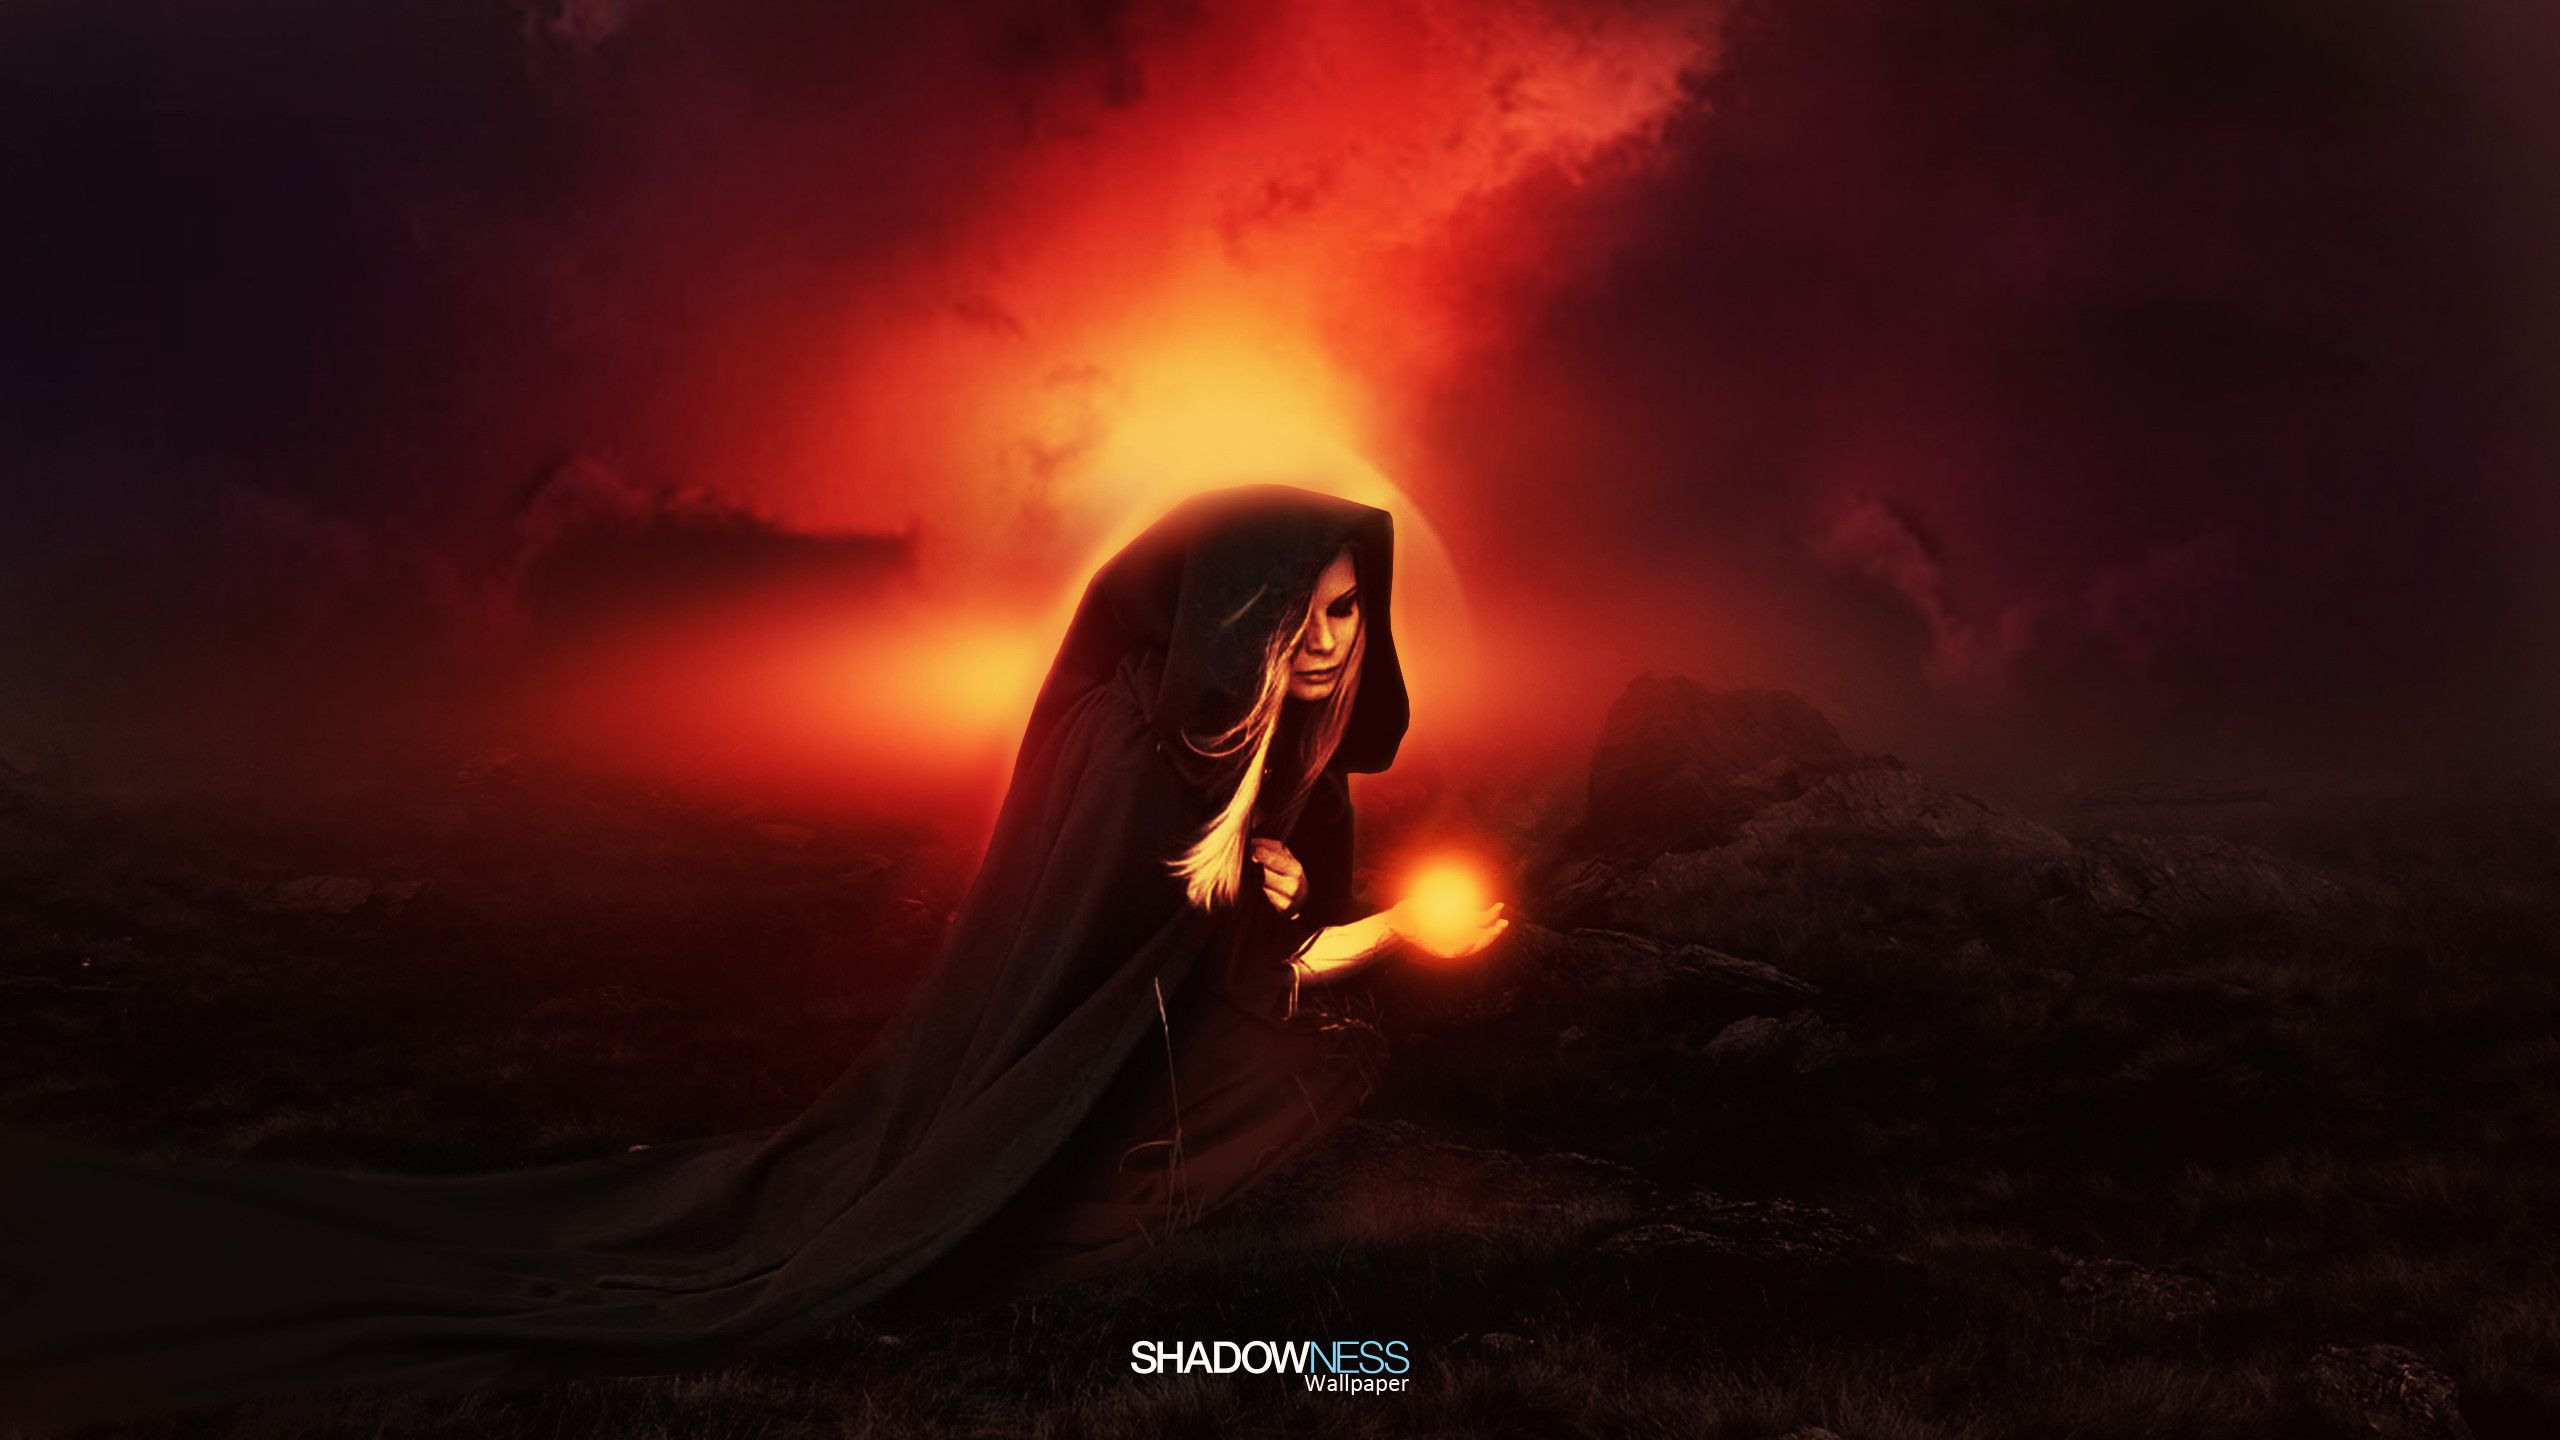 Gallery for - shadowness wallpaper